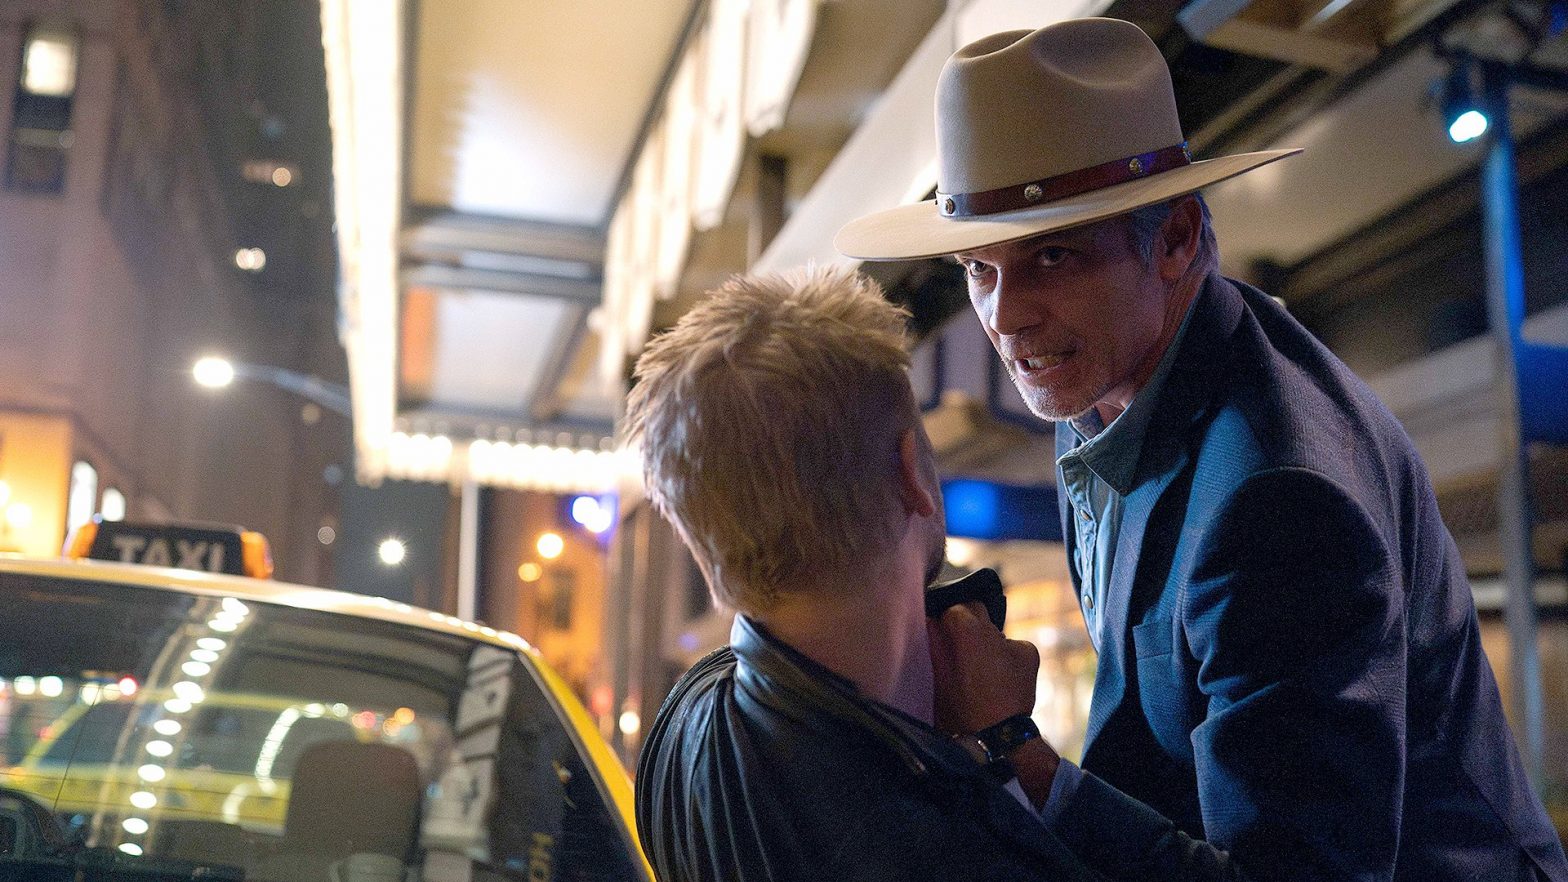 Justified: City Primeval: Release Date, plot, cast, trailer, director and more